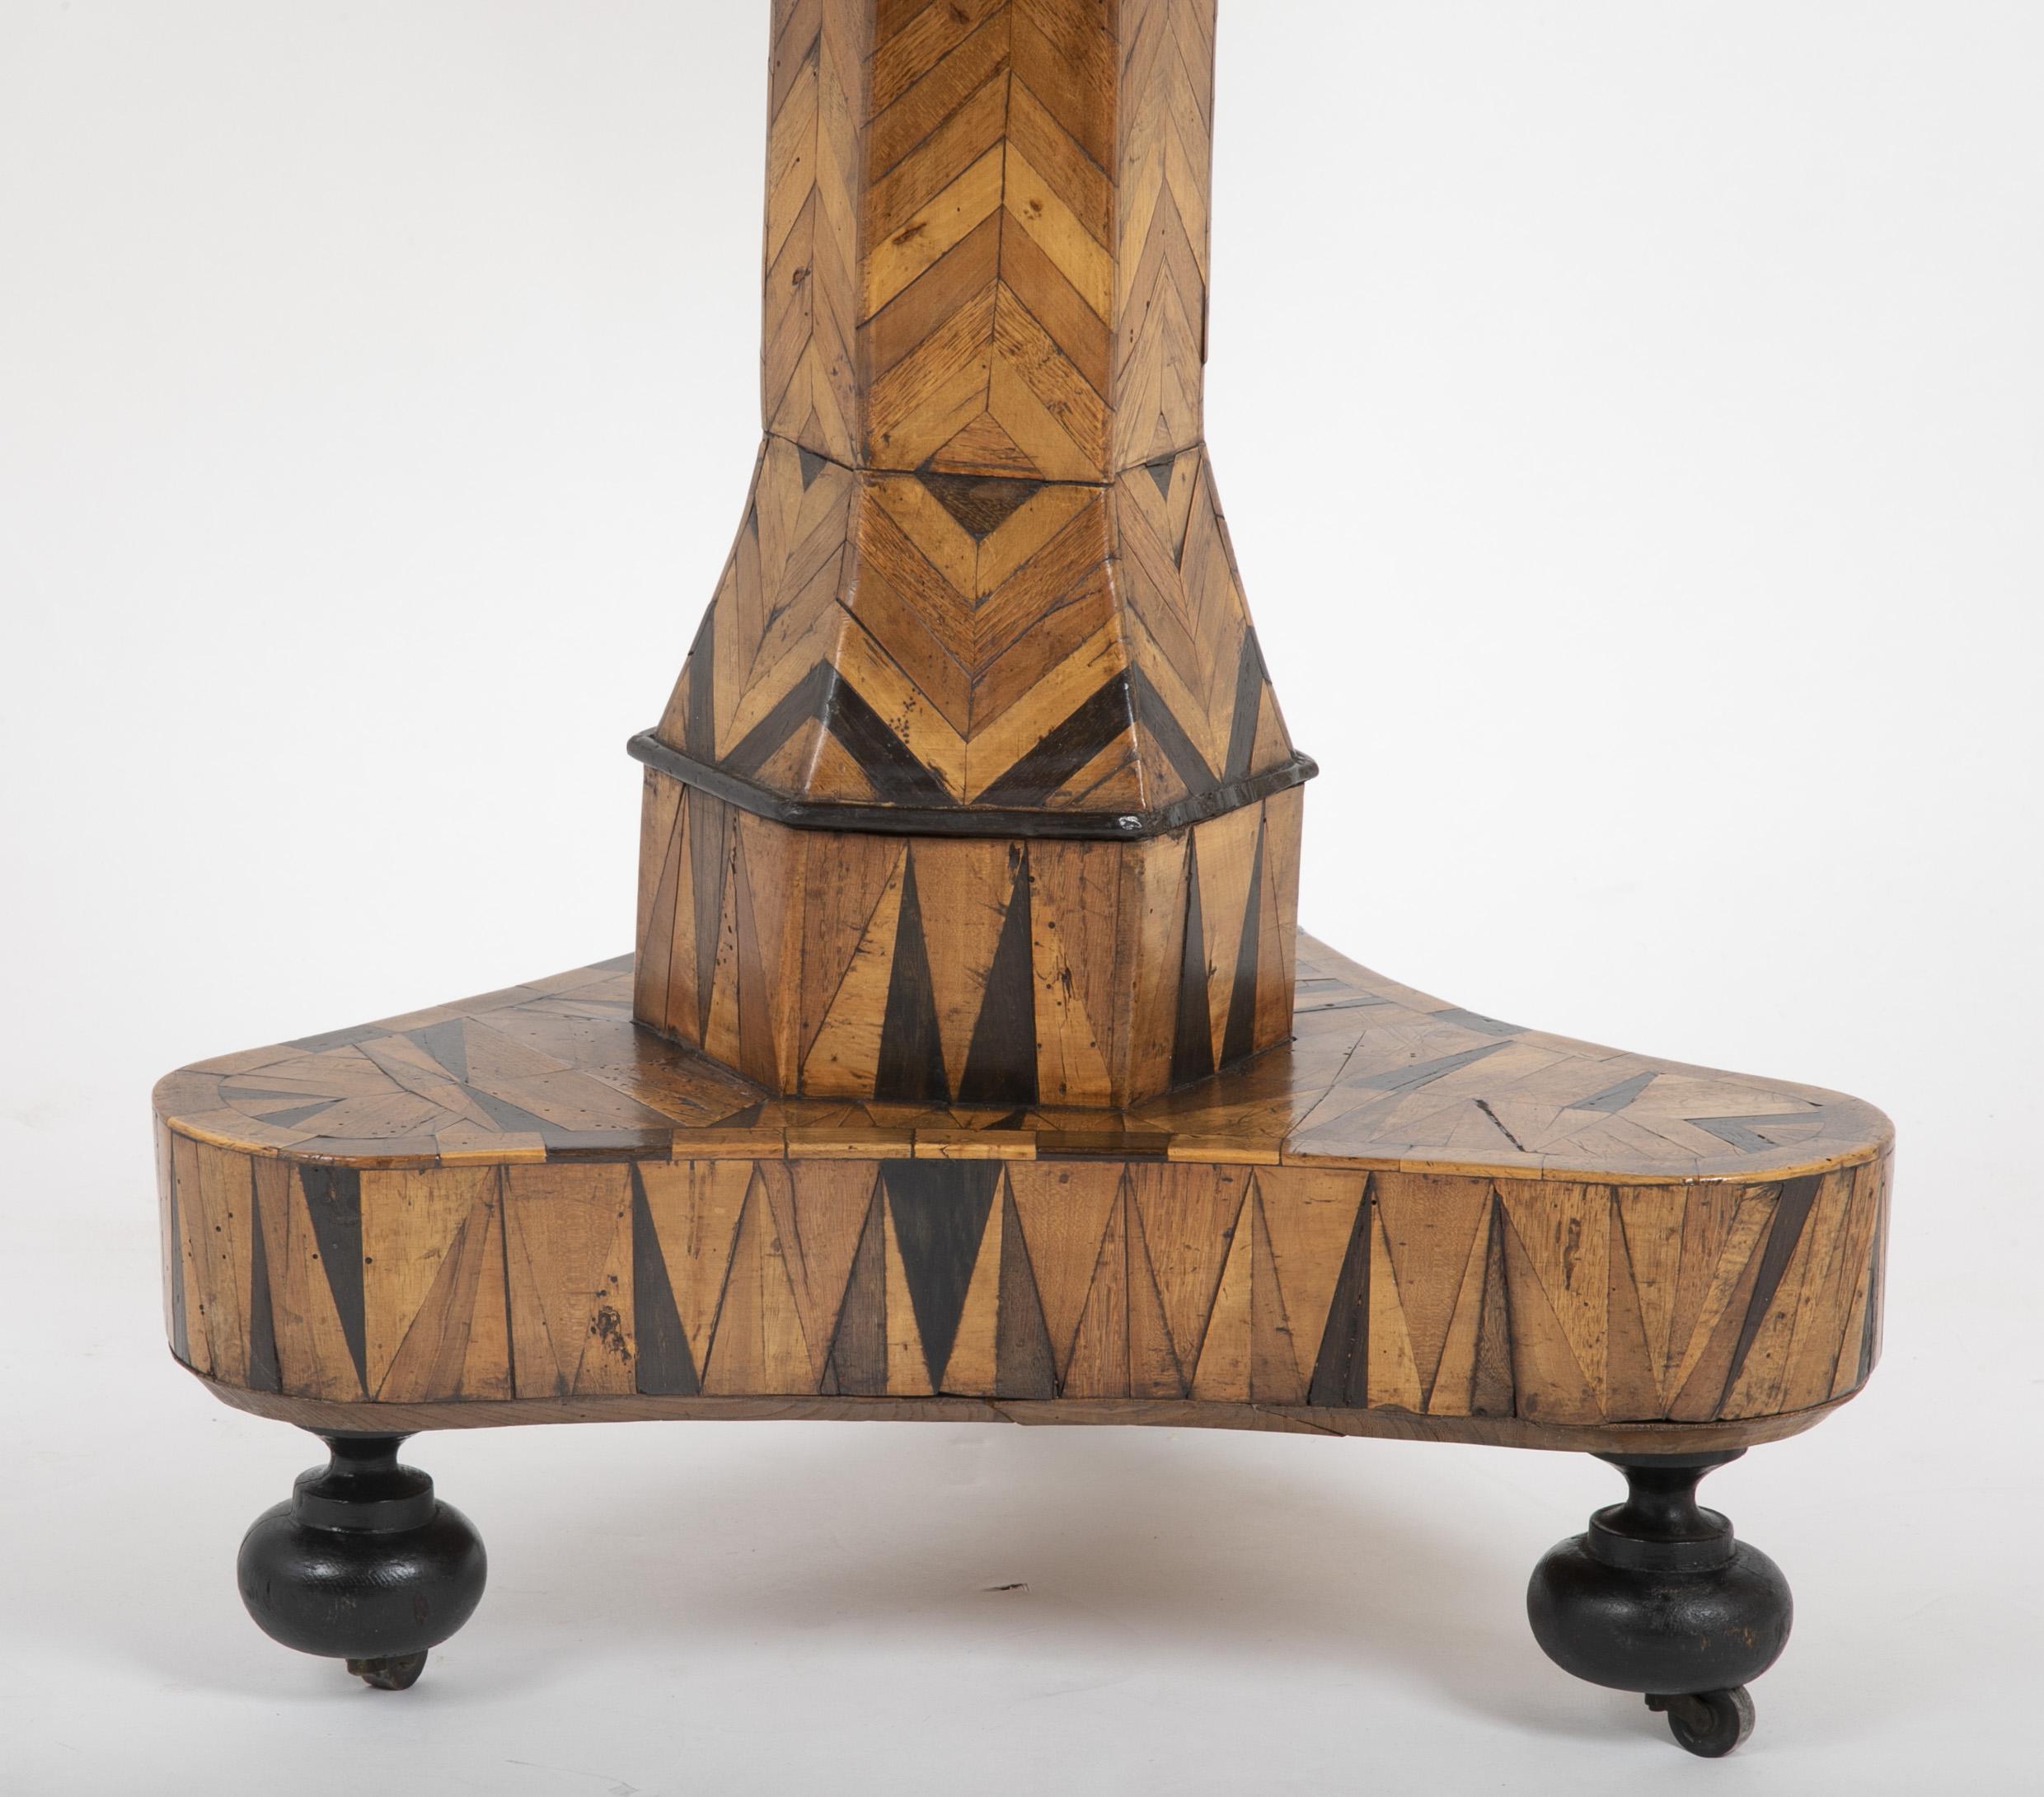 European Early 19th Century Continental Parquetry Center Table